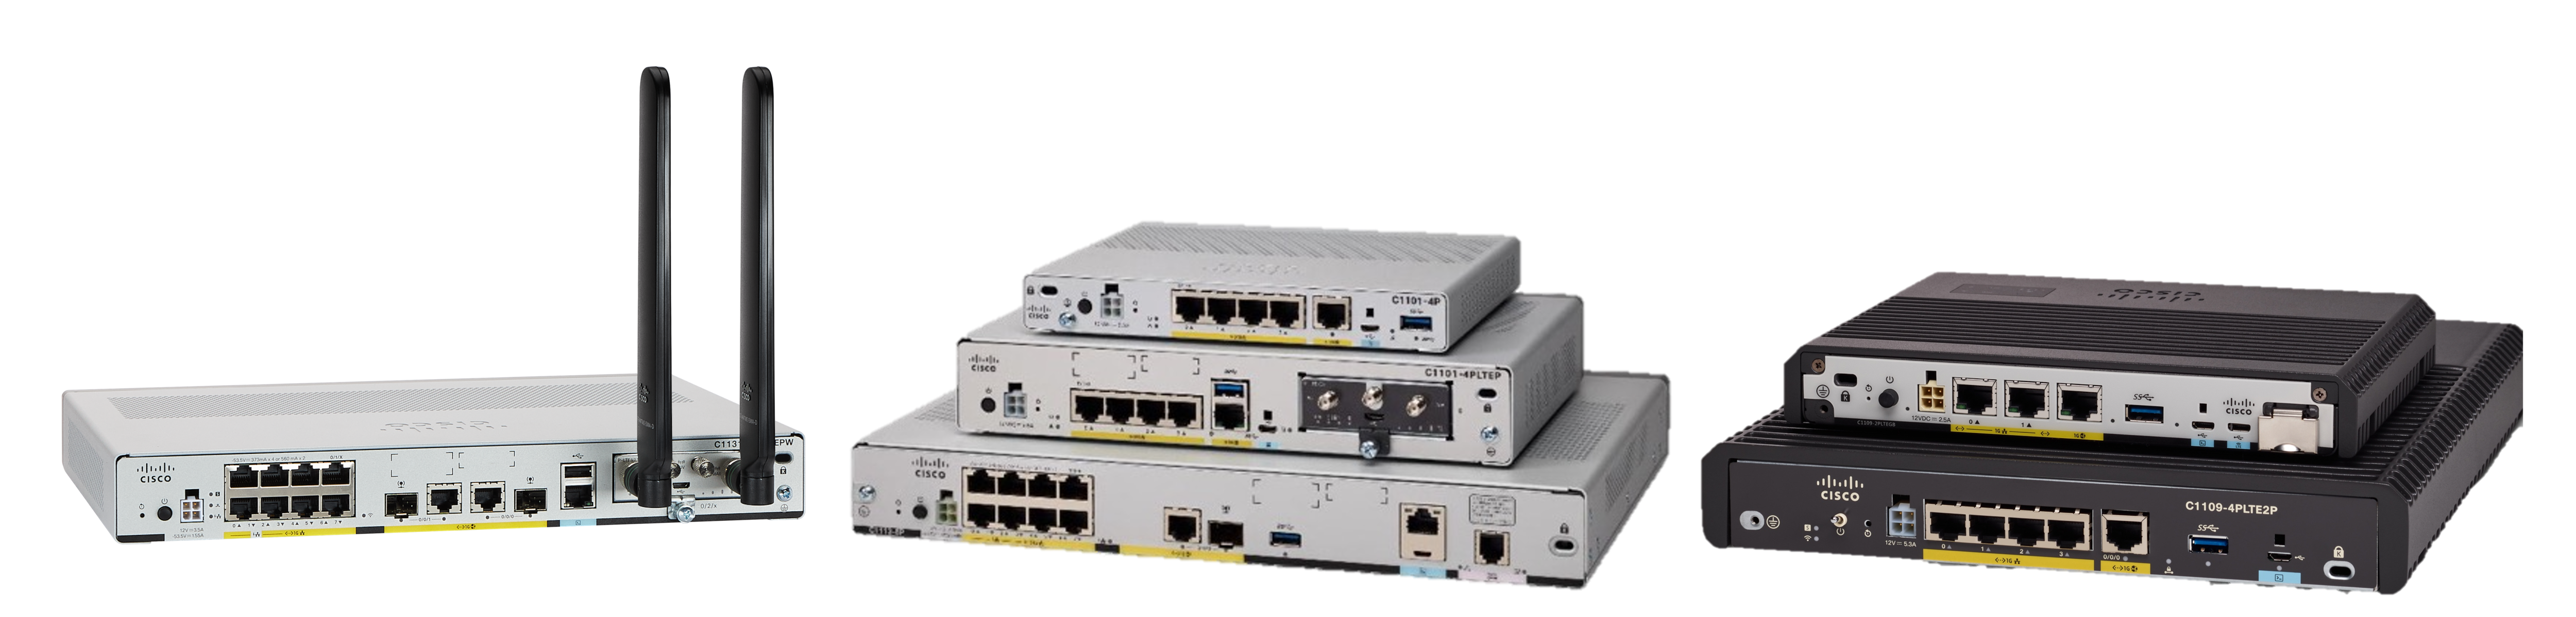 Cisco 1000 Serie Integrated Services Routers